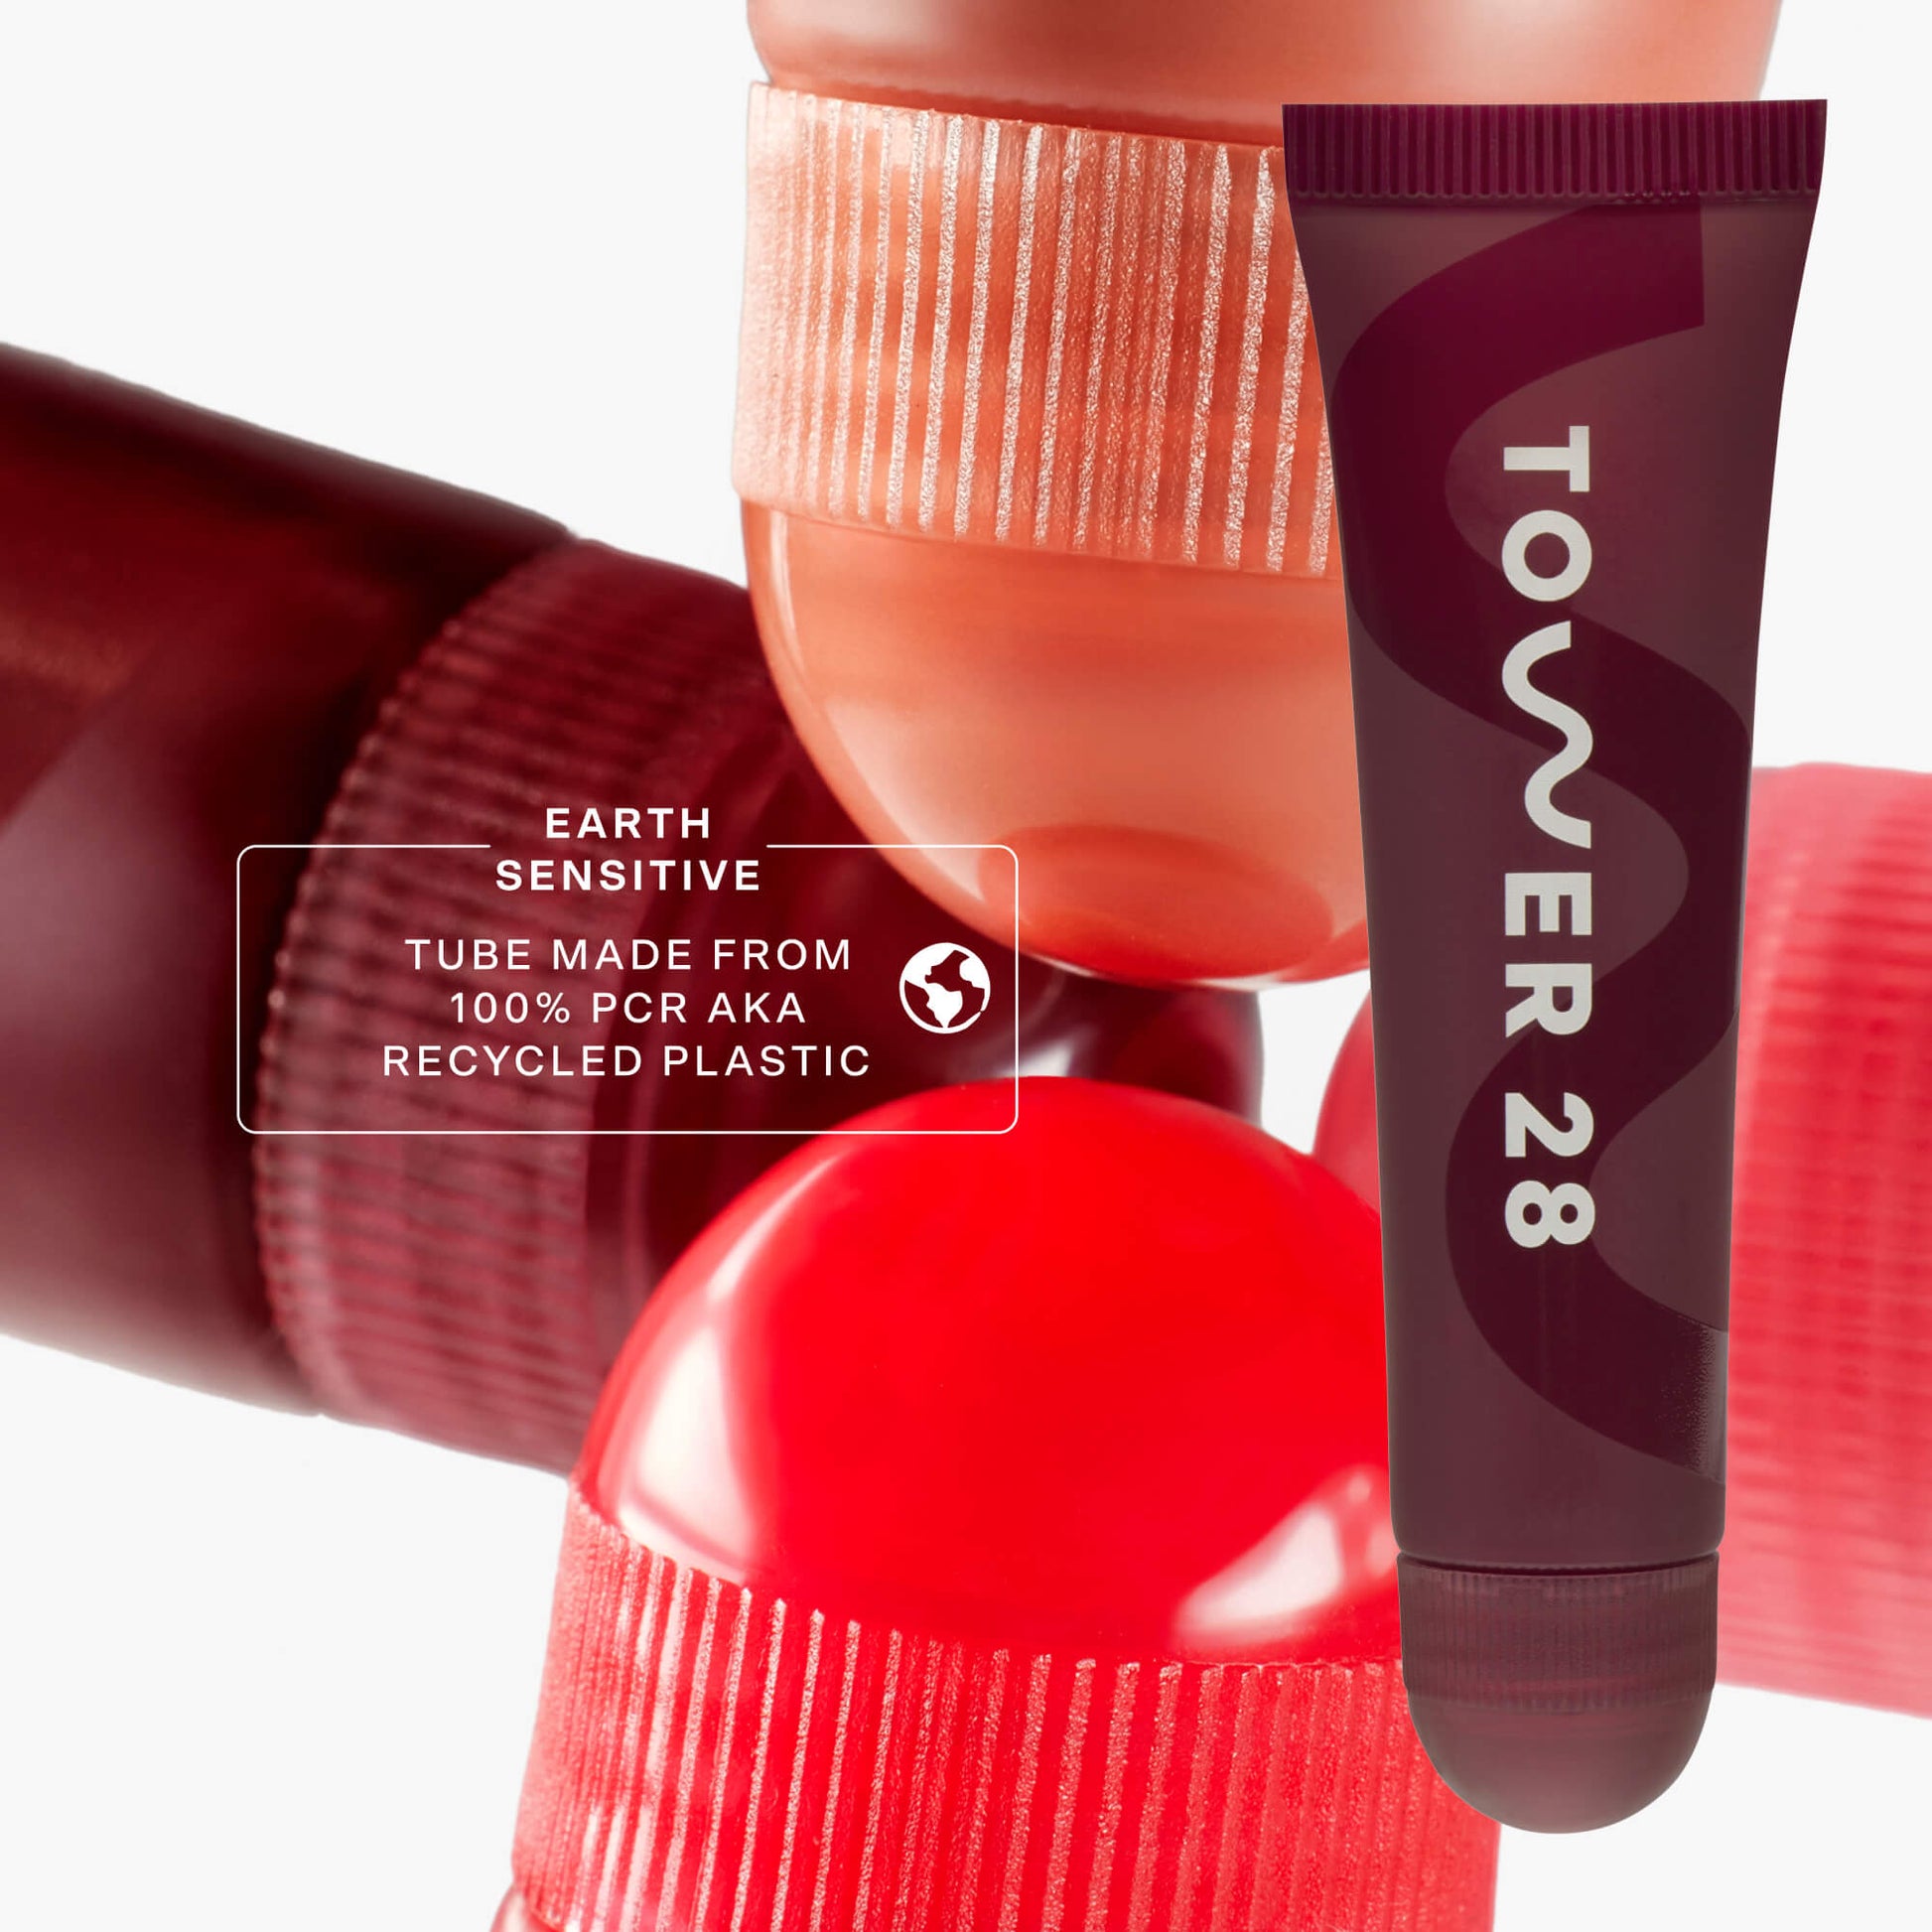 [Tower 28 Beauty LipSoftie™ Lip Treatment in Ube Vanilla has 100% recycled plastic packaging.